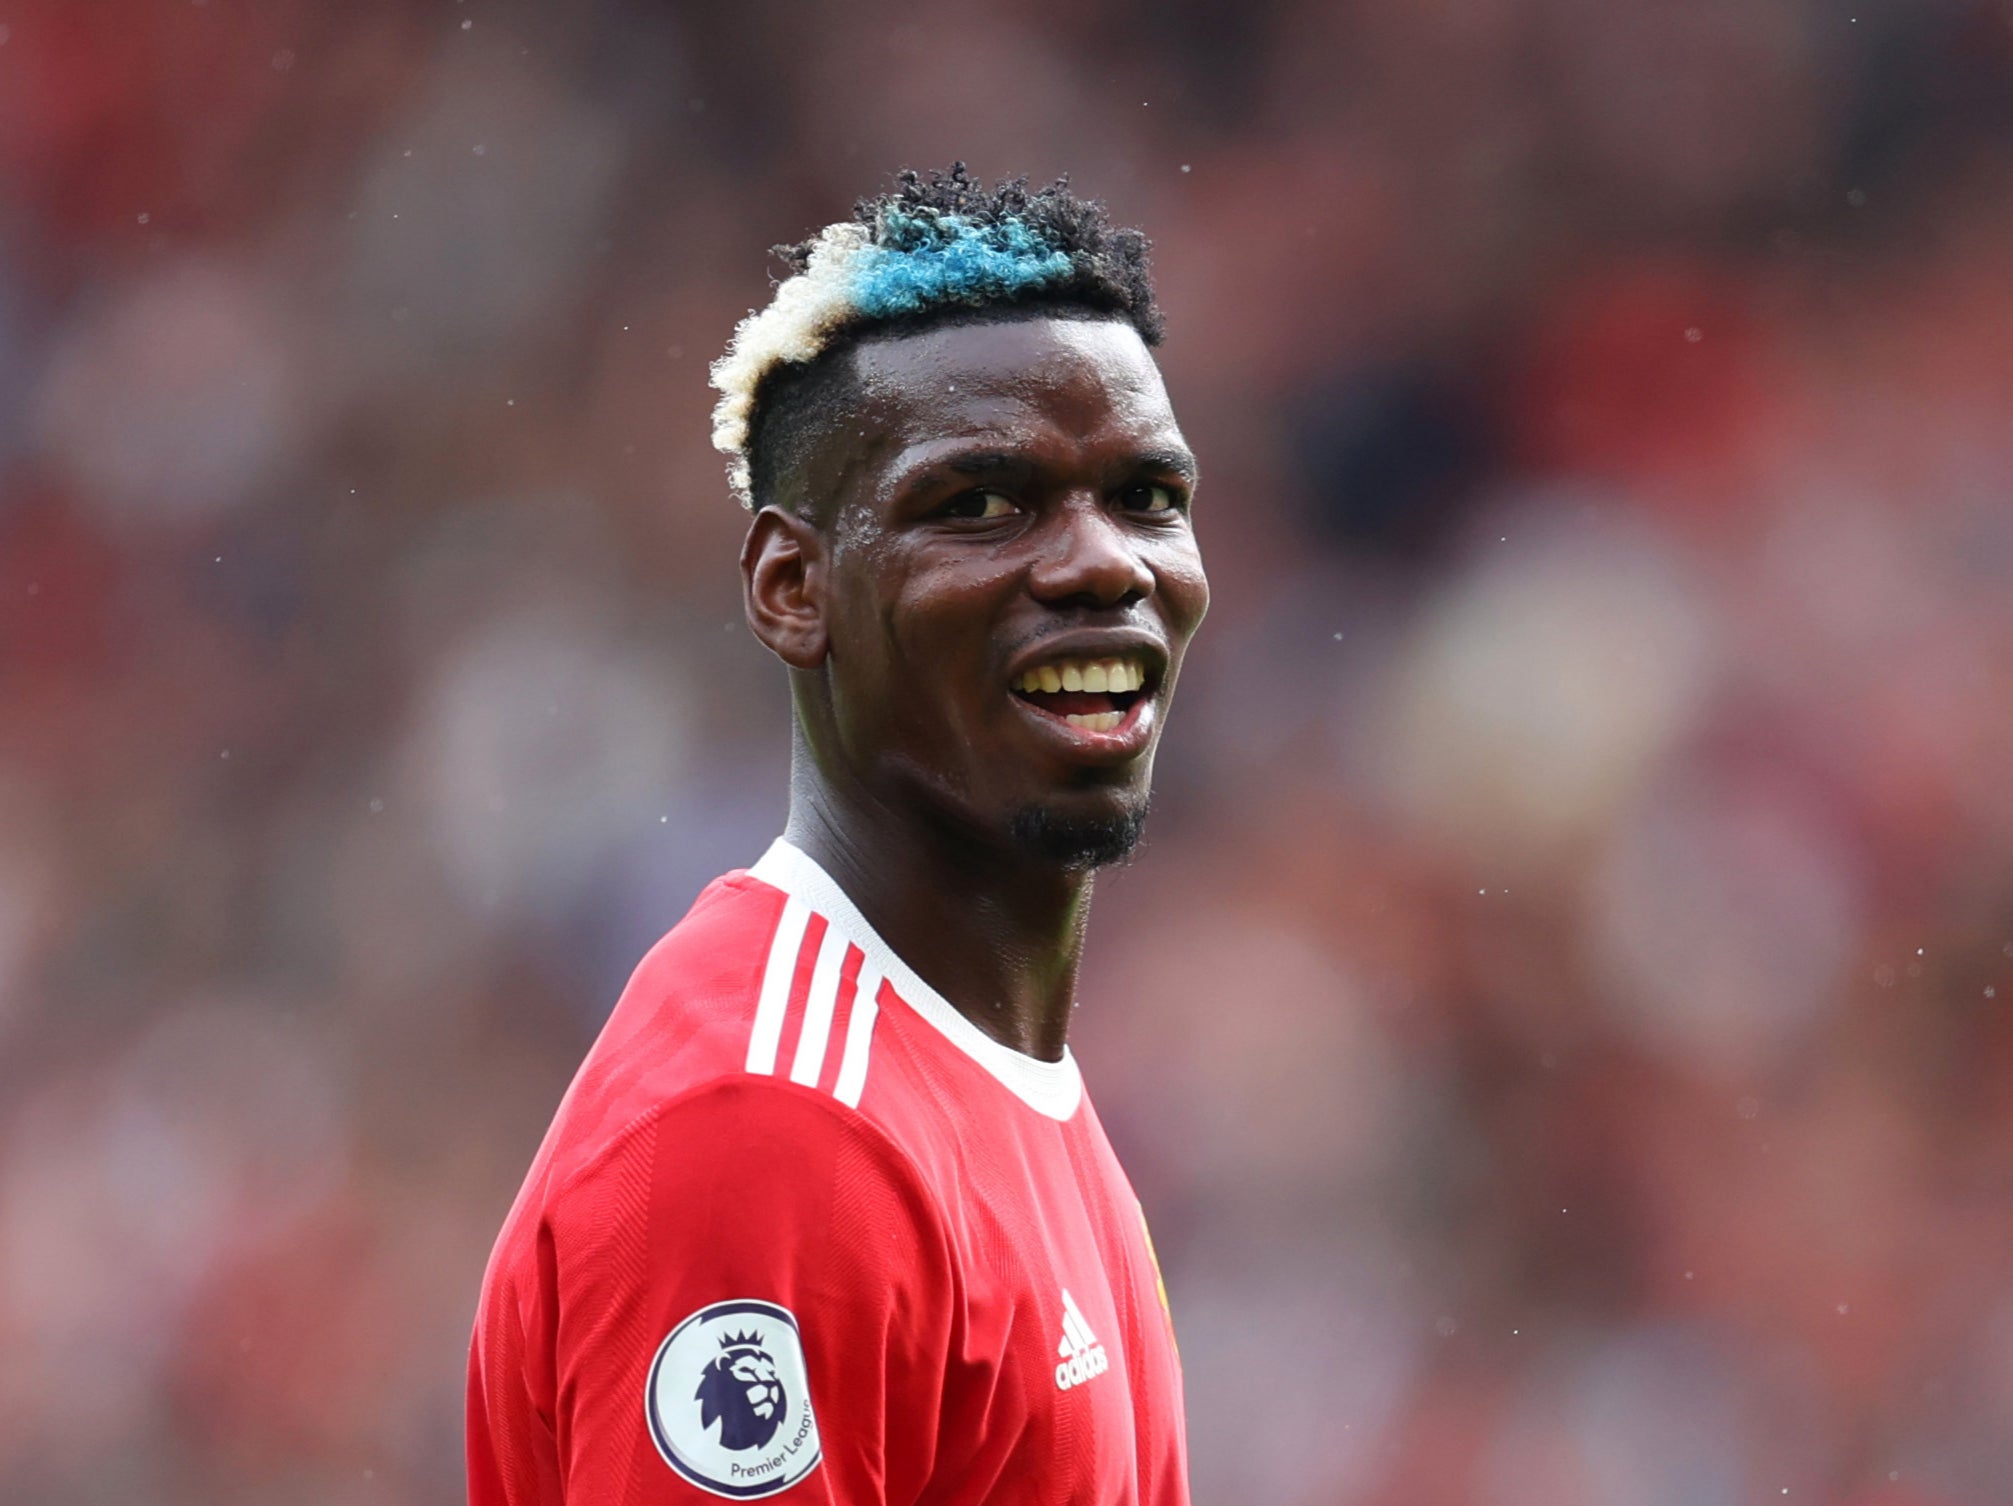 Paul Pogba recorded four assists for Man United against Leeds